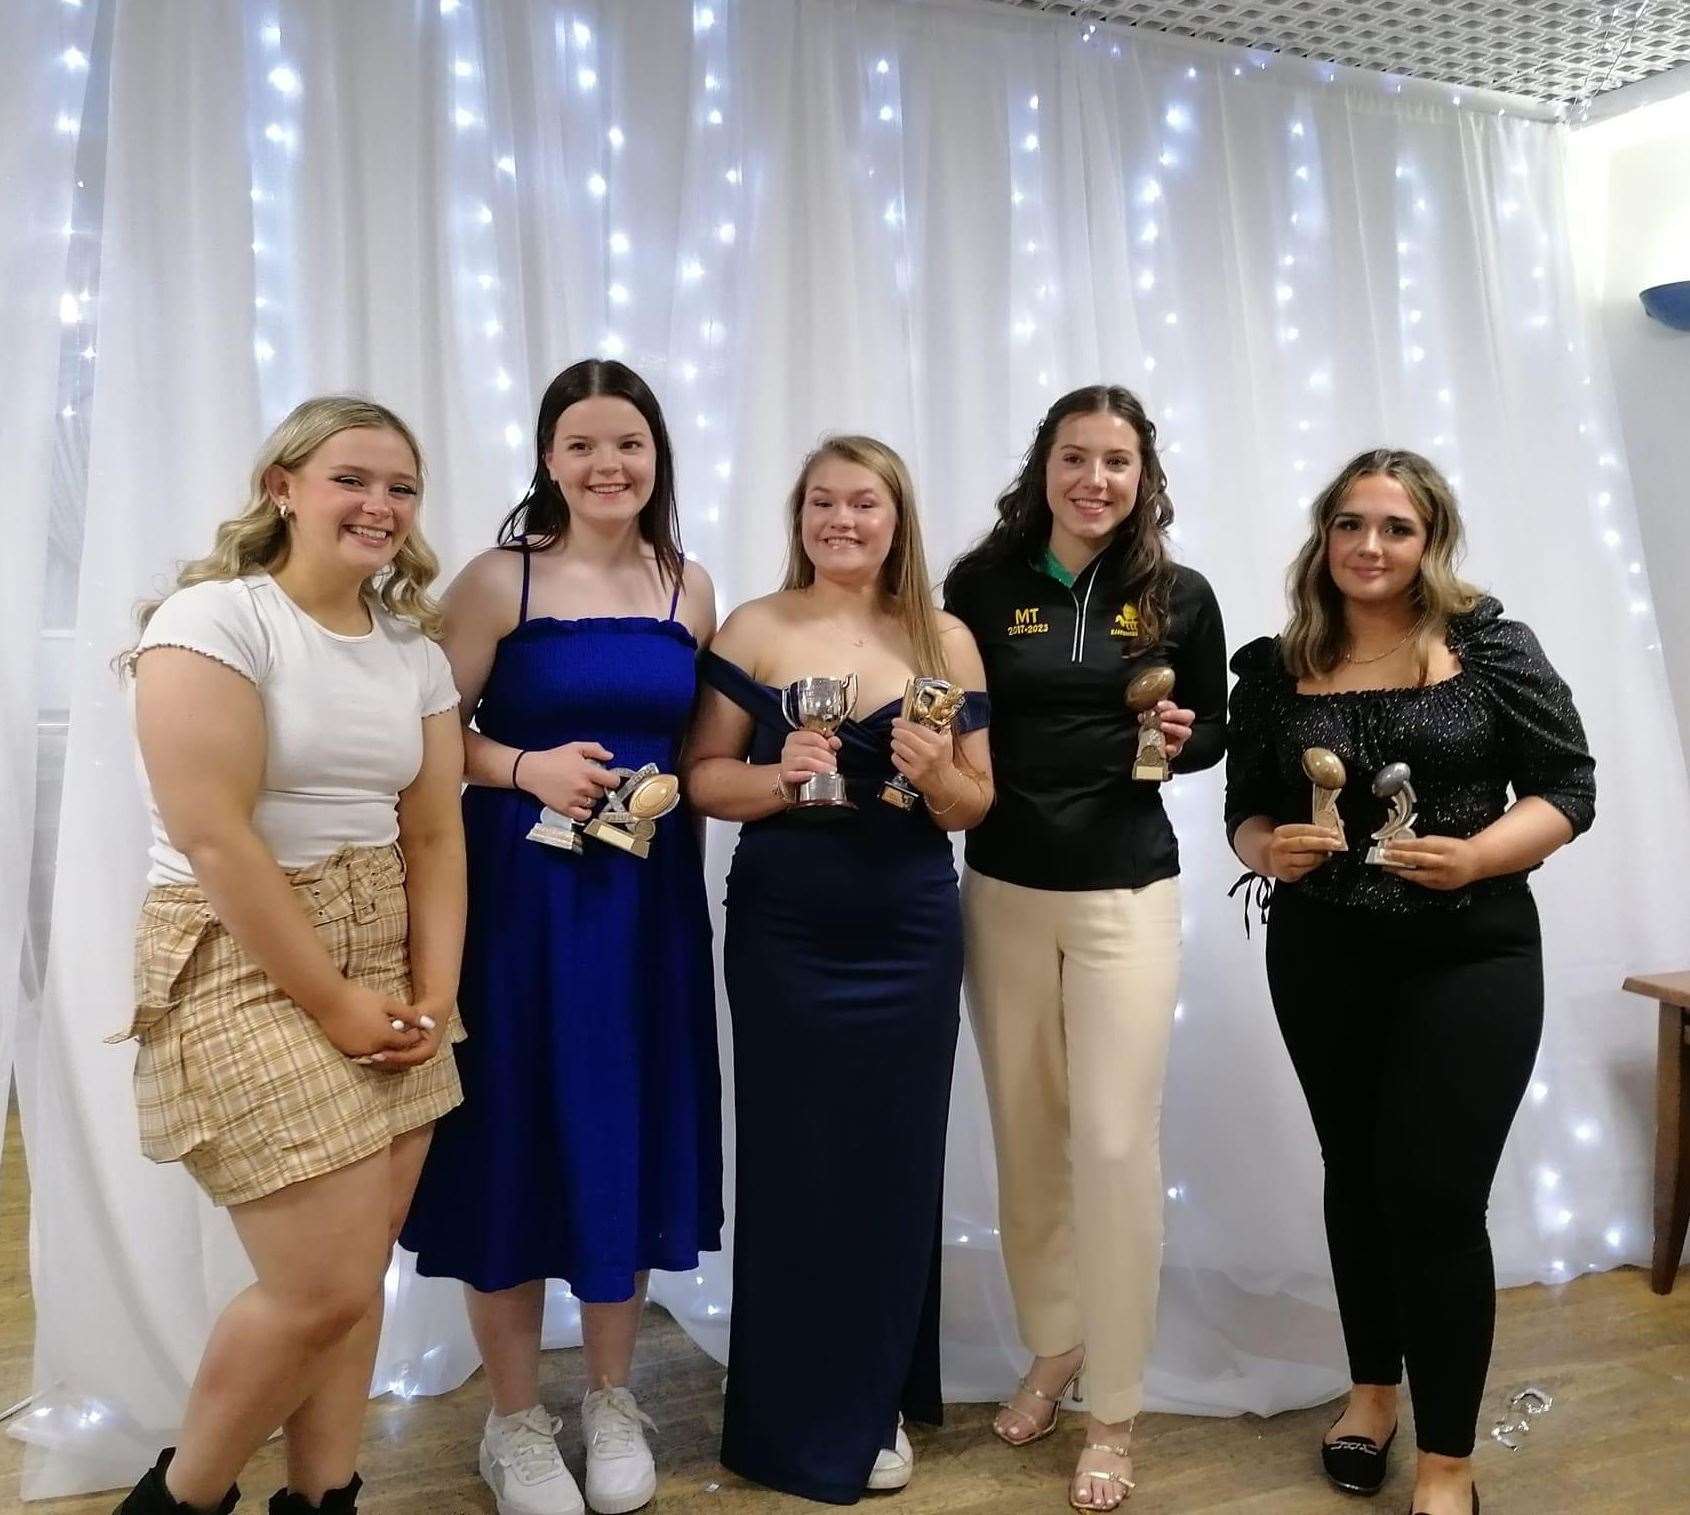 Under-18s at the Caithness girls' rugby awards event.